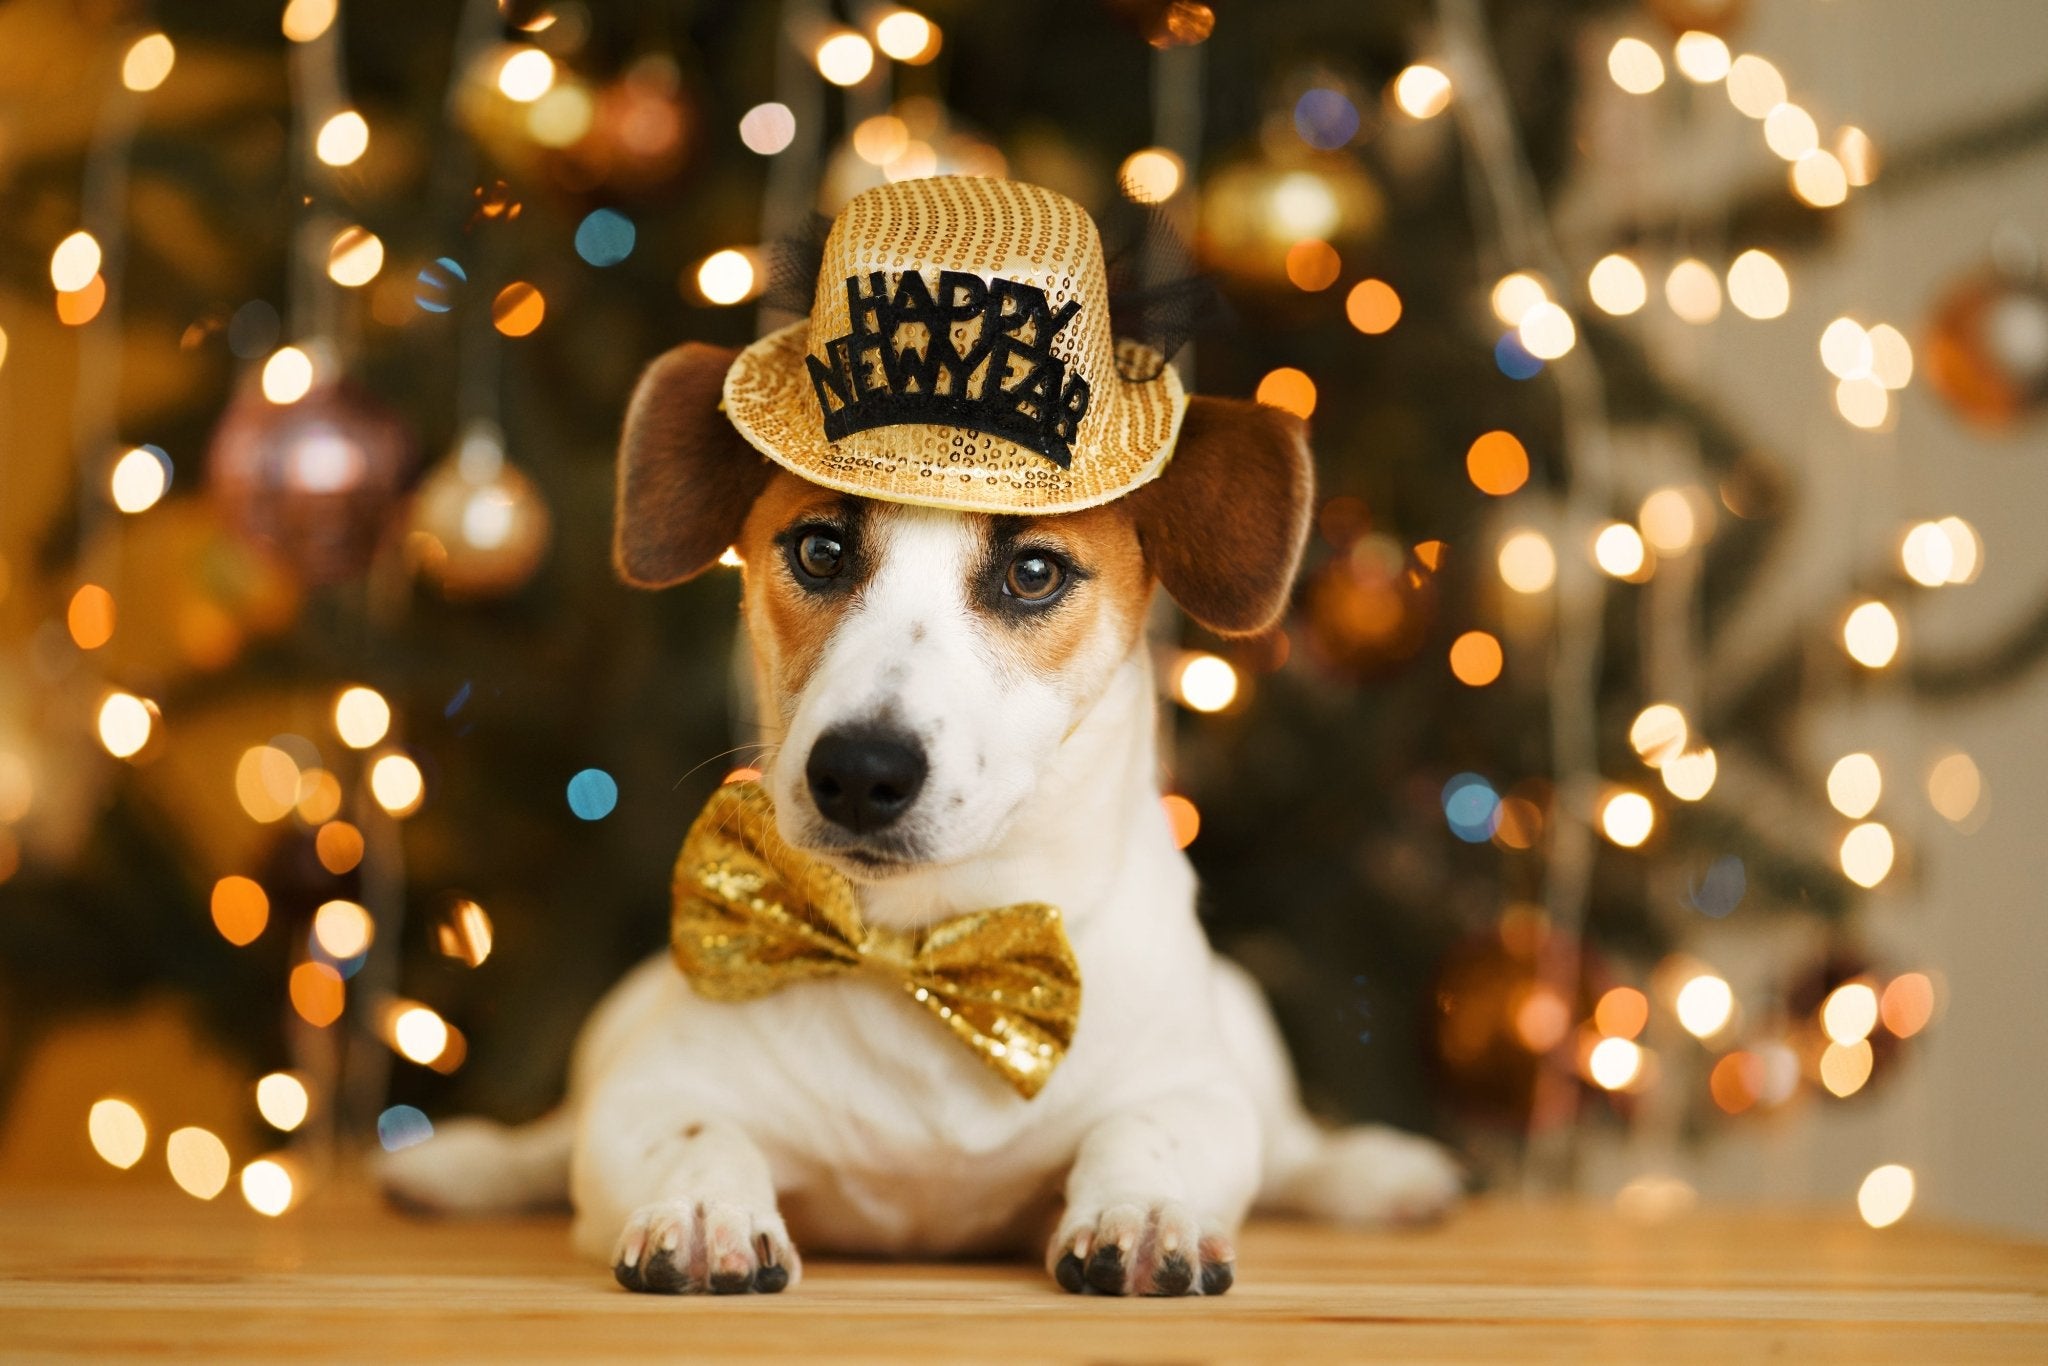 Tips to keep your dog safe this New Year's Eve